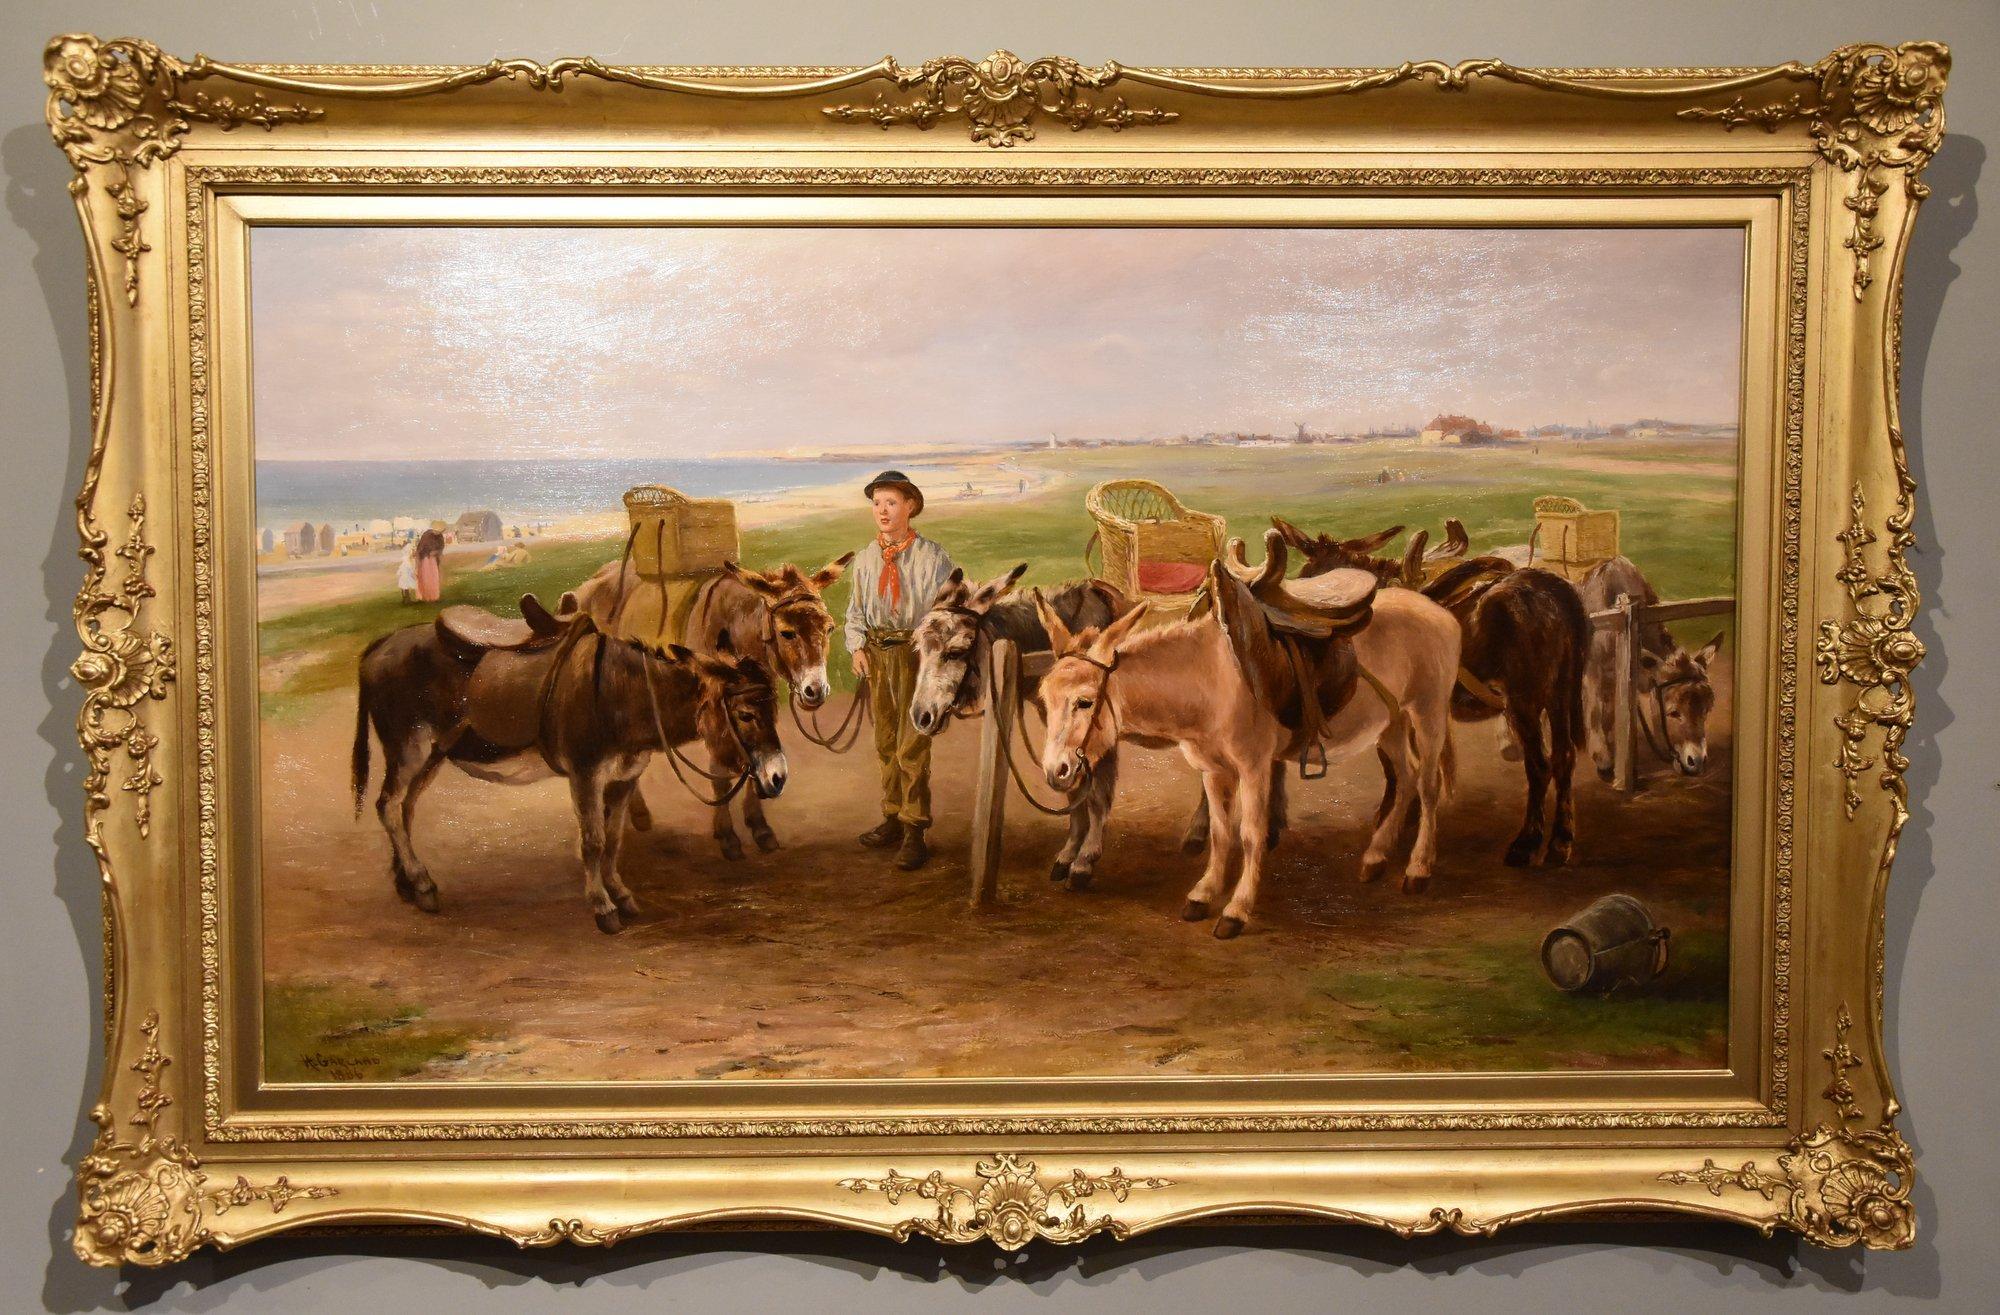 Oil Painting by Henry Garland "The Donkey Ride, Littlehampton"